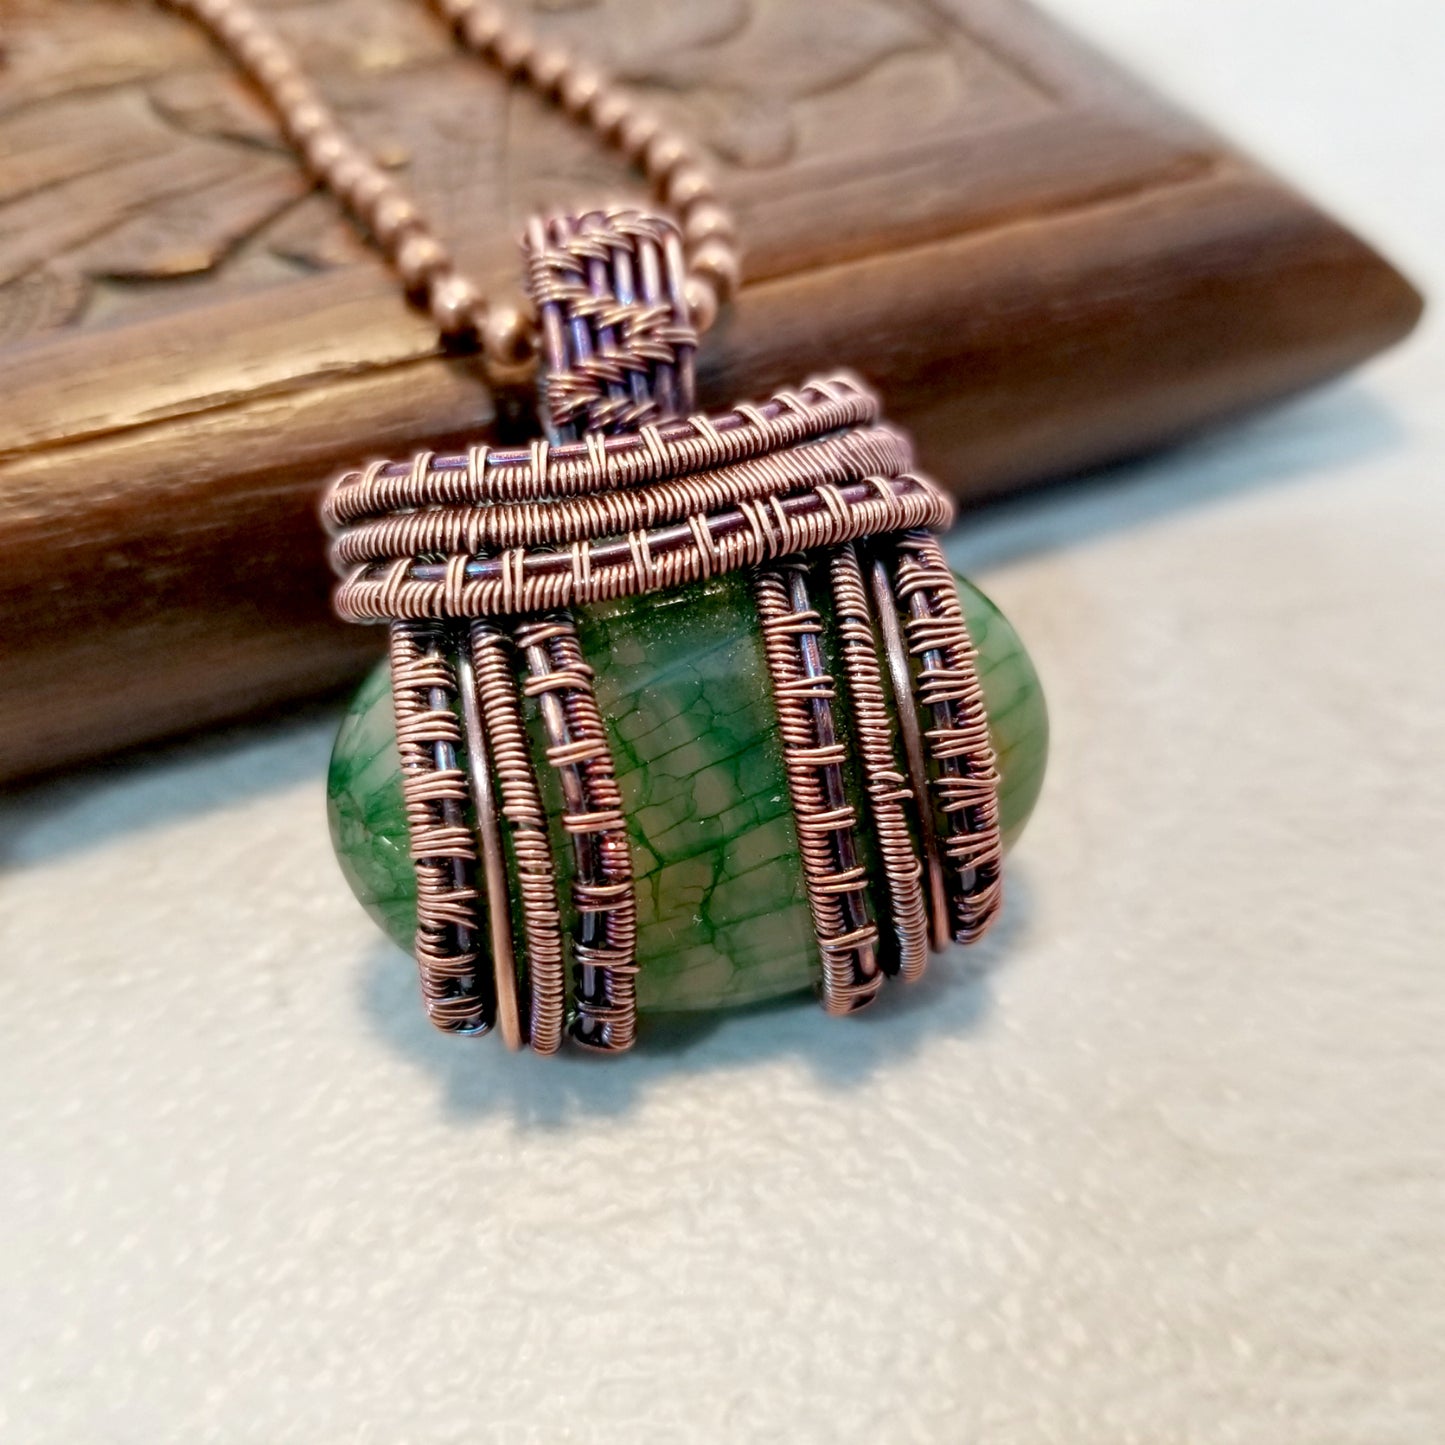 Dragon Vein Agate Necklace, Wire Woven Pendant